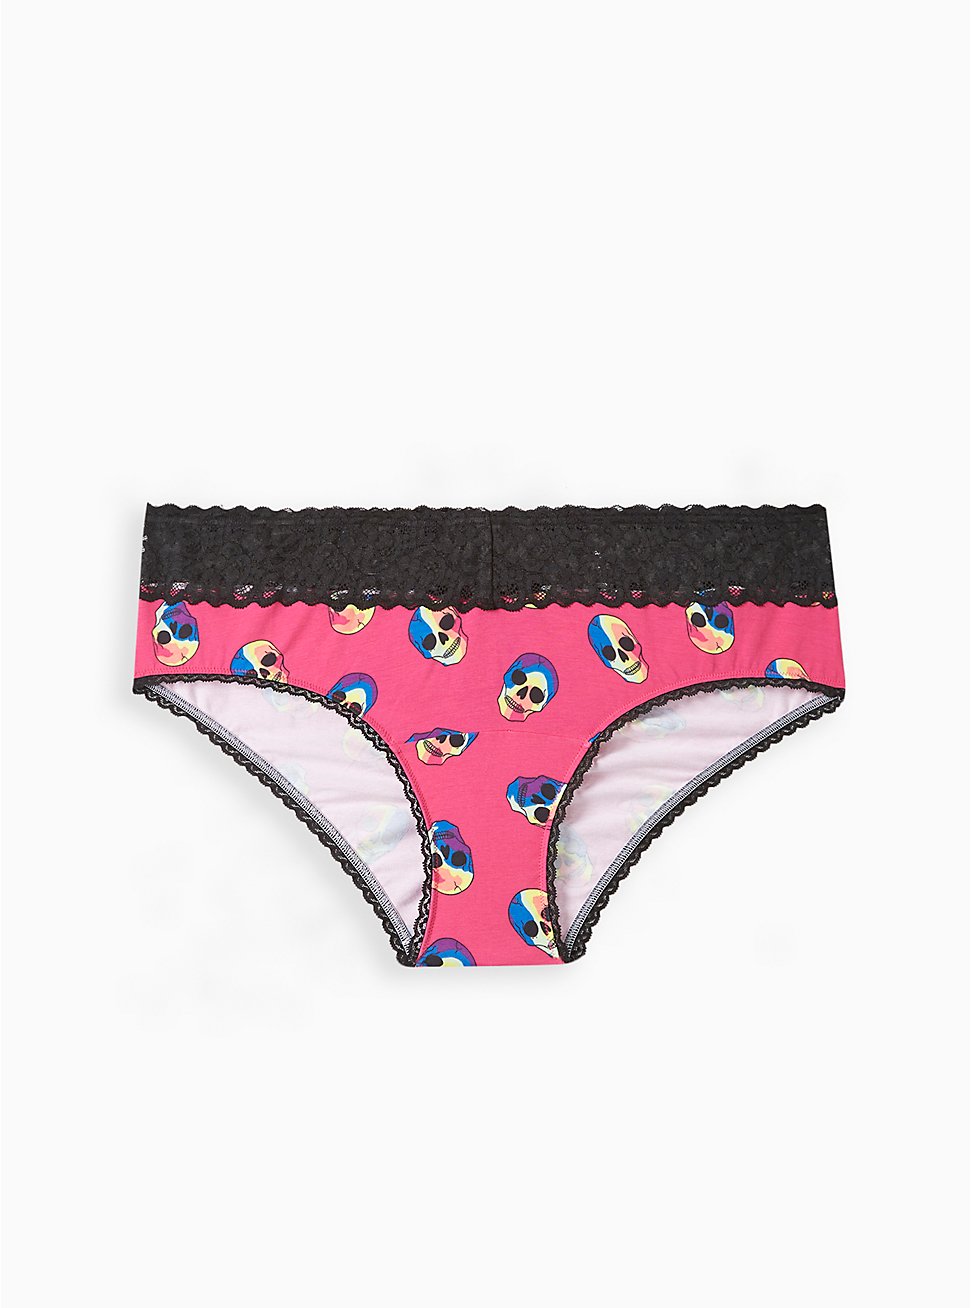 Cotton Mid-Rise Hipster Keyhole Panty, RAINBOW SKULL, hi-res